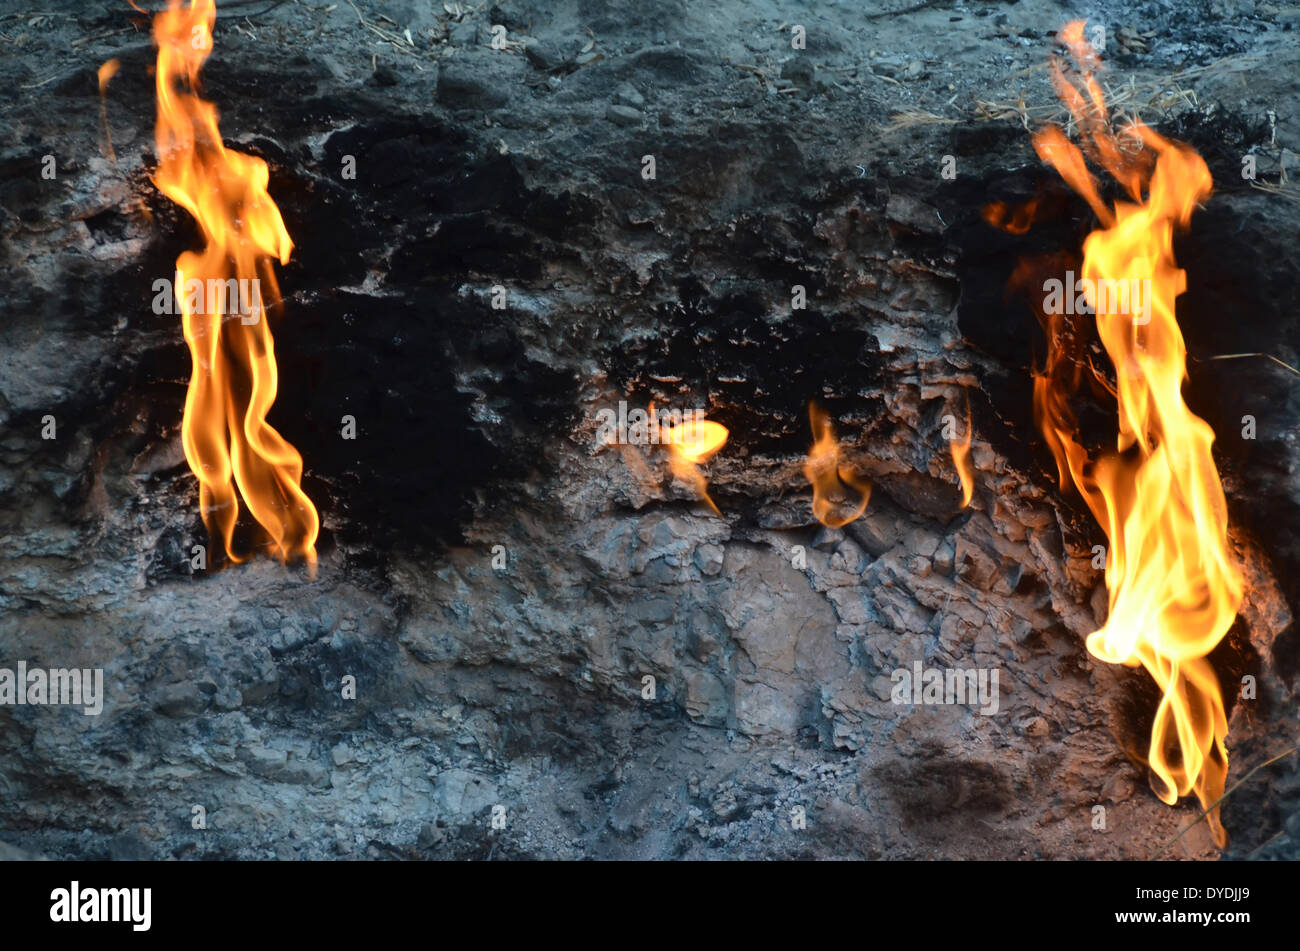 flame fire chimaera chimera gas natural gas flames ignite nature natural incendiary alight stone rock Olympics olympos Oly Stock Photo